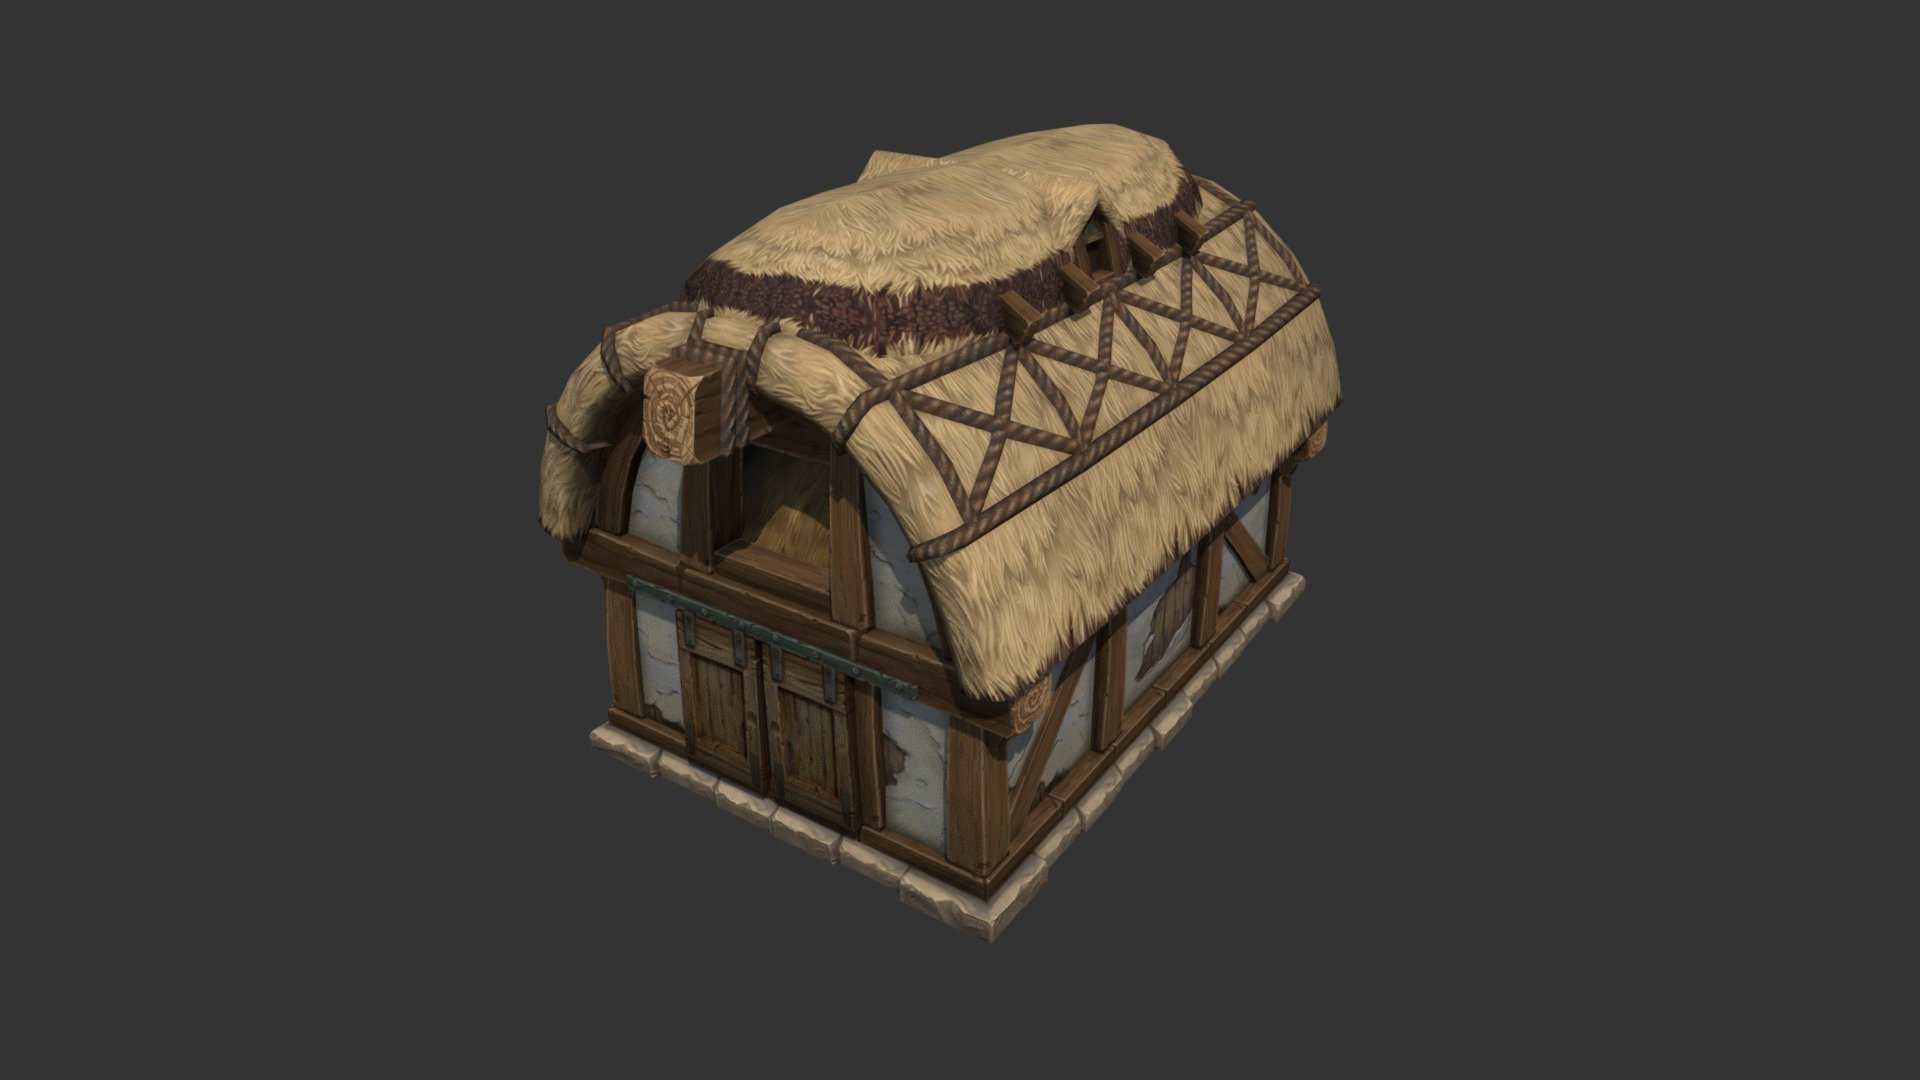 One of the village structures I created for Warcraft: Armies of Azeroth mod. They came in very handy for some Lordaeron themed maps.

Original textures by Blizzard Entertainment - Barn - 3D model by Longbowman 3d model